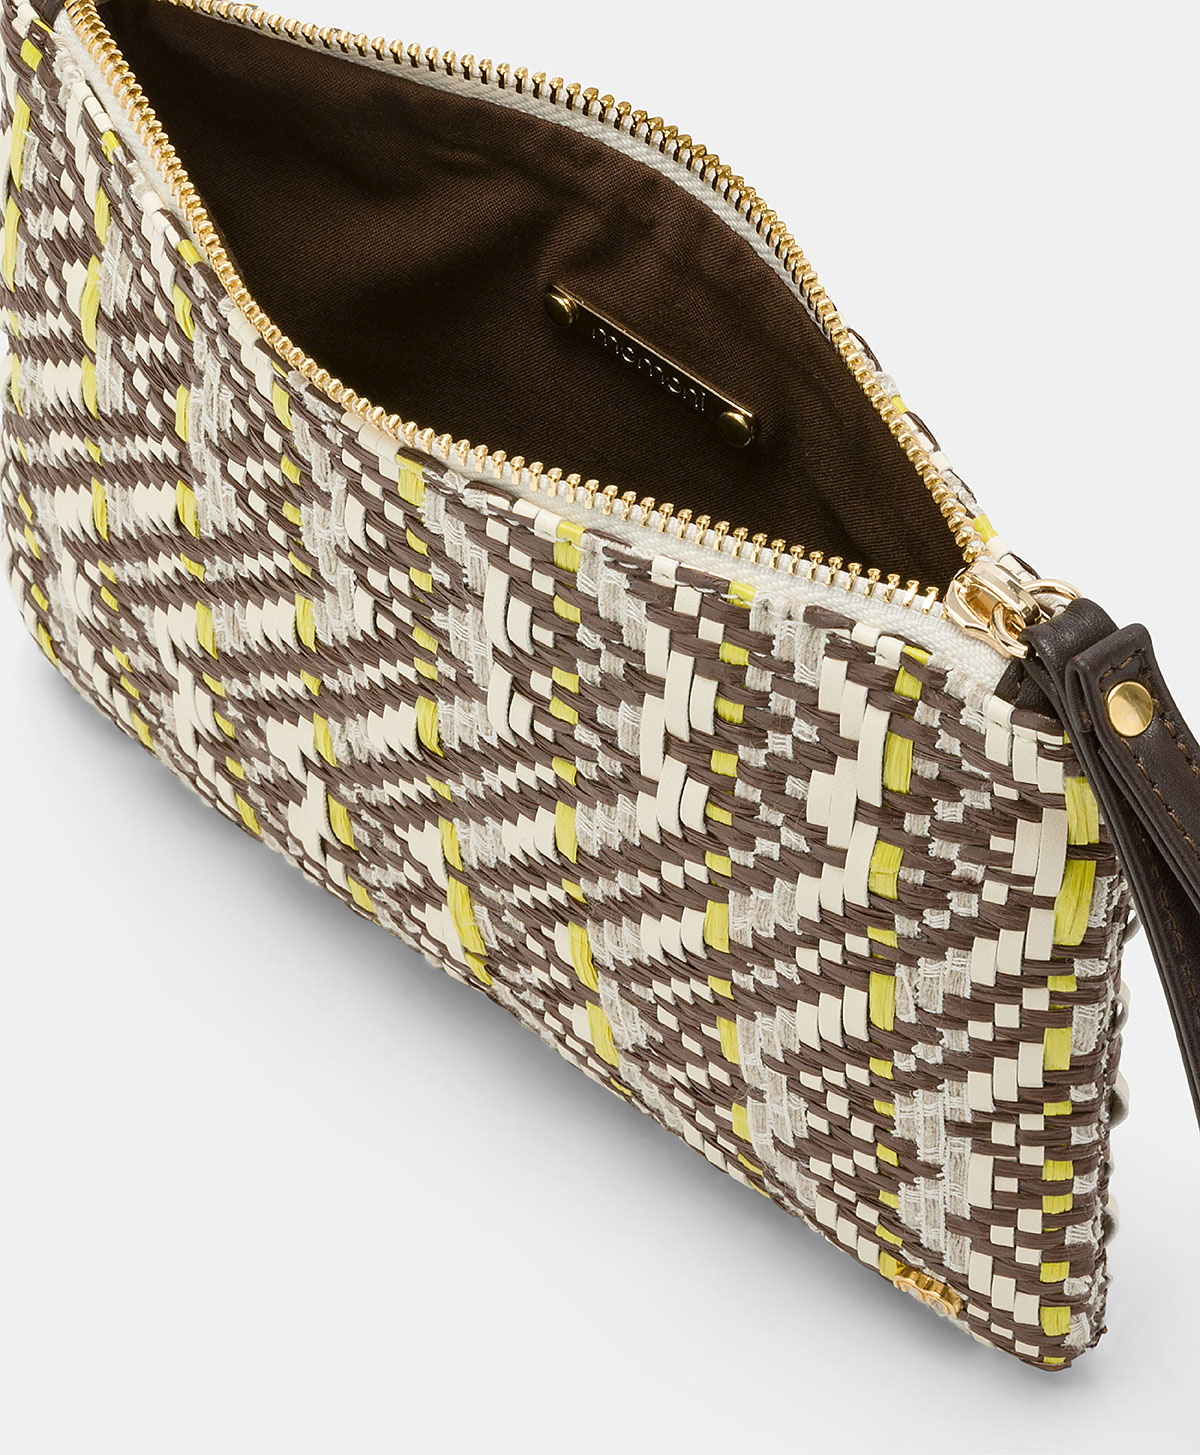 FRAGUA BAG WITH WOVEN - BROWN / MULTICOLOR - Momonì